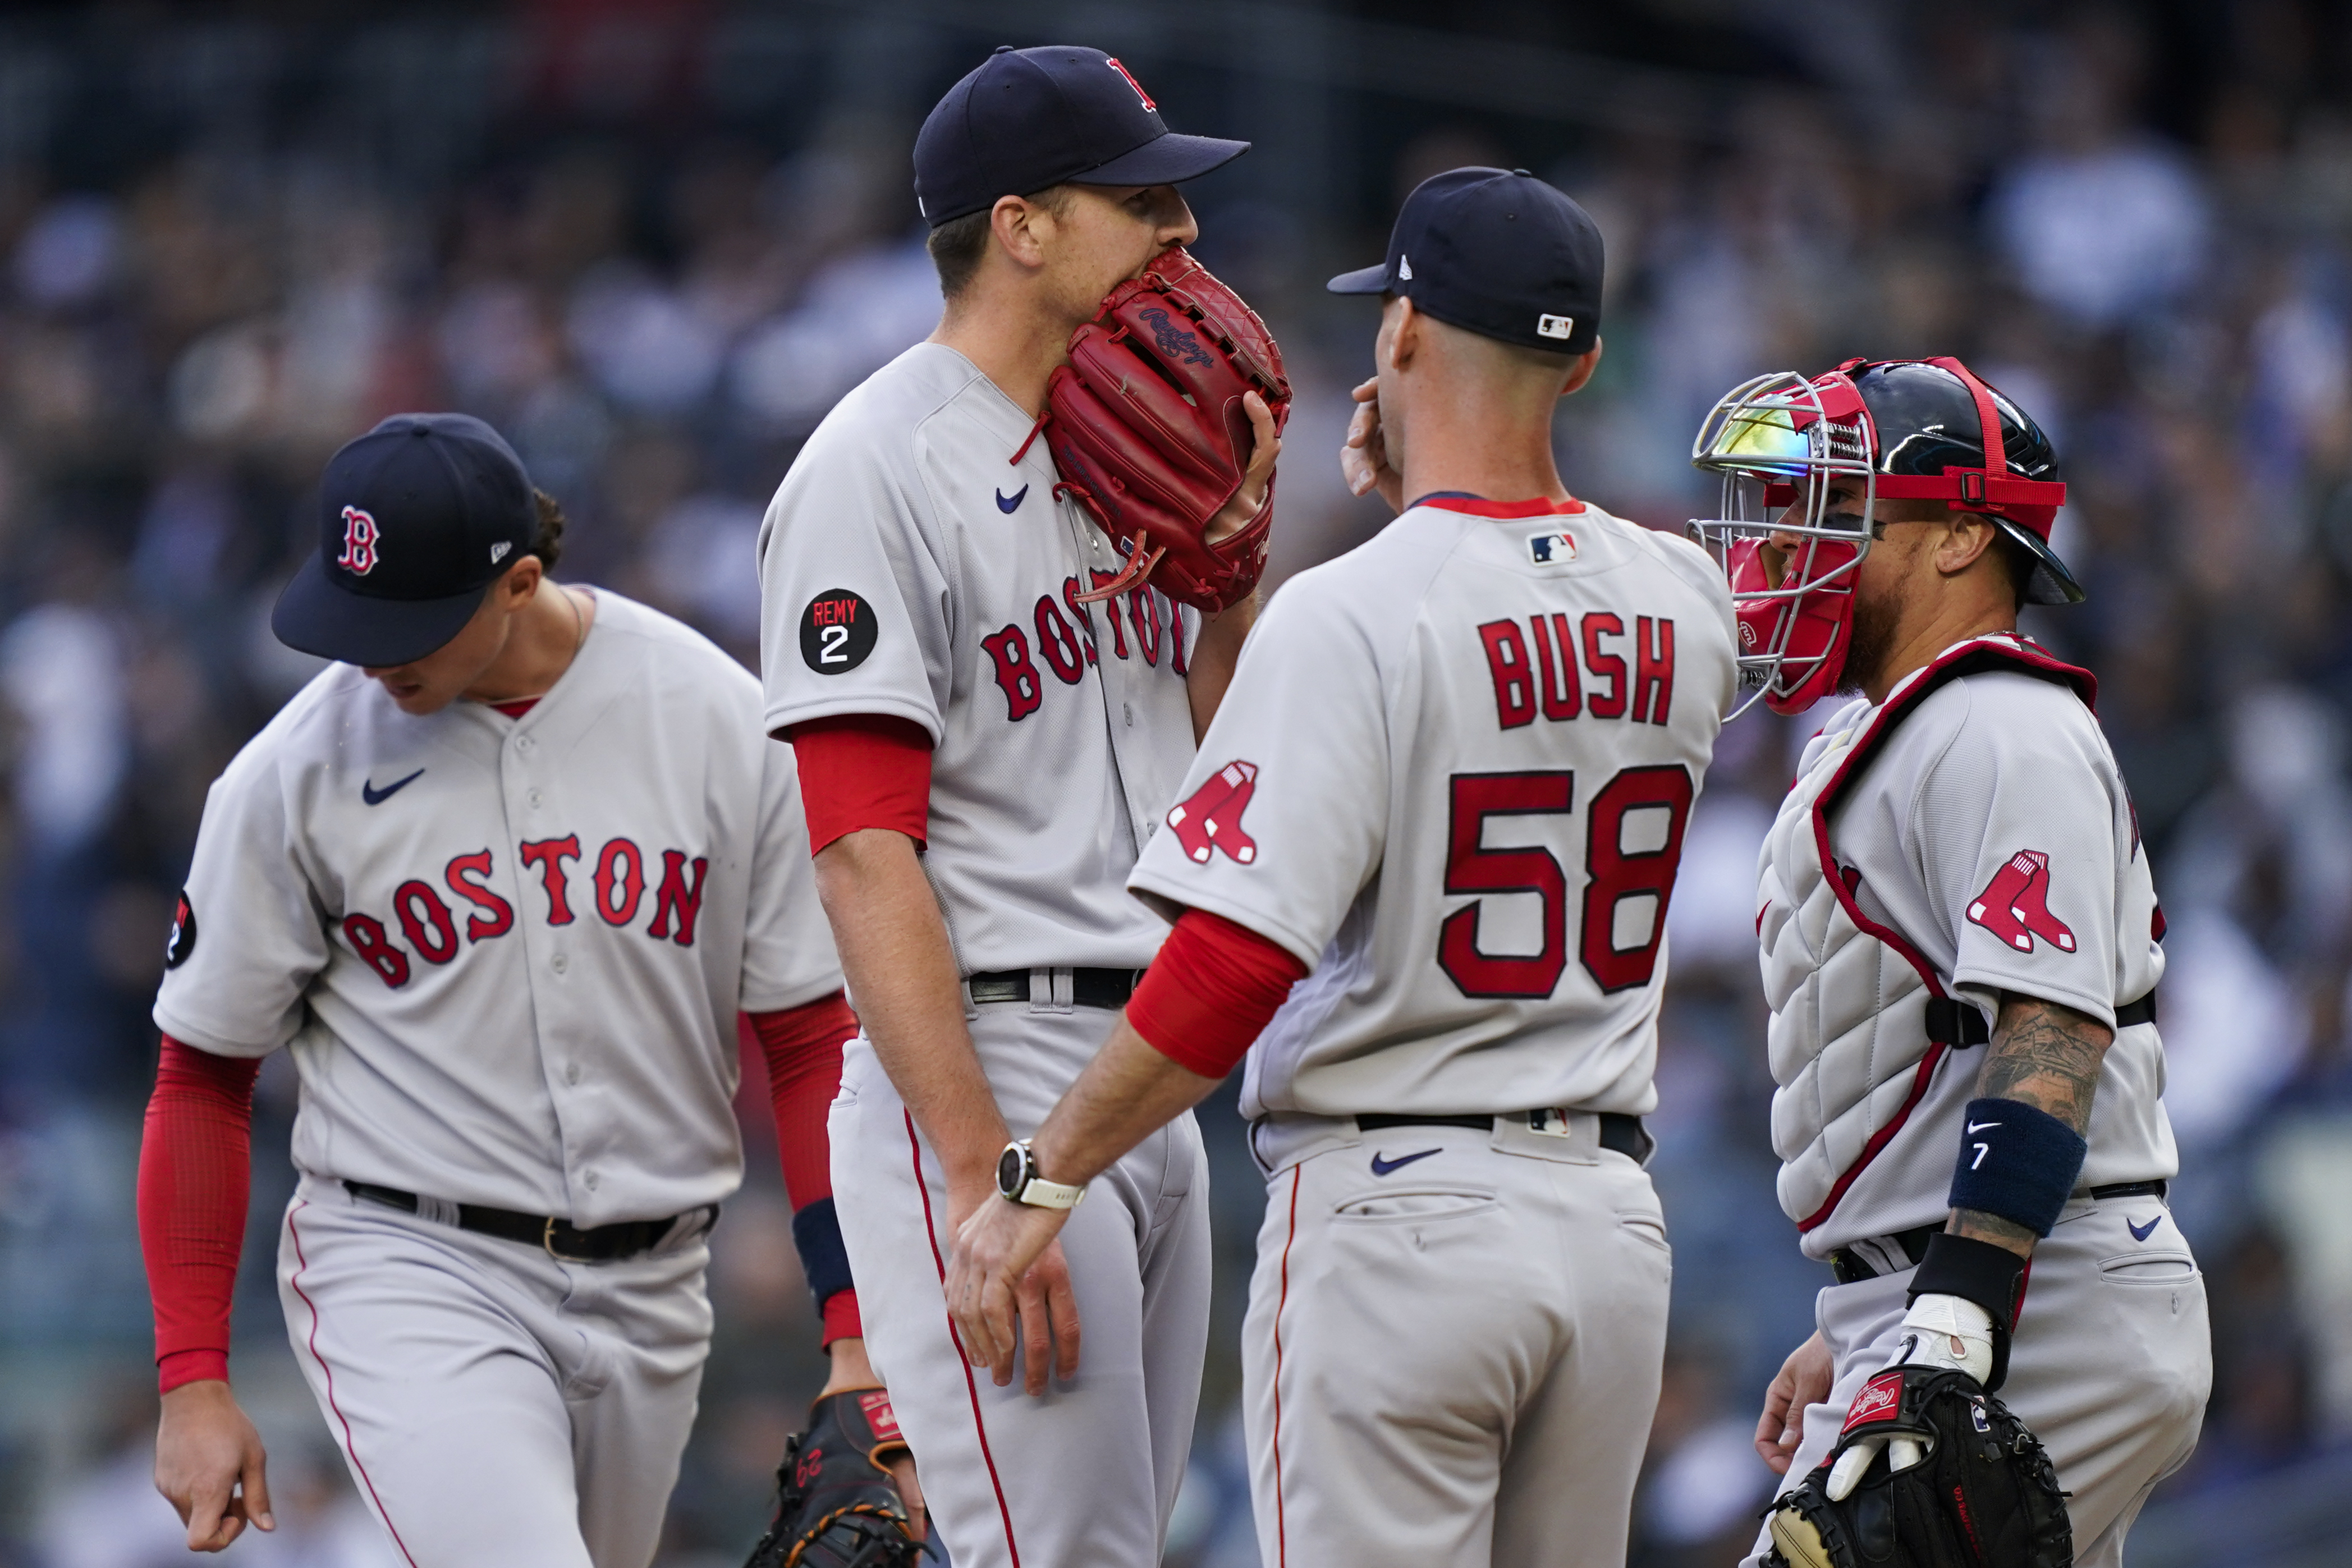 The Red Sox once again show us they still might have life